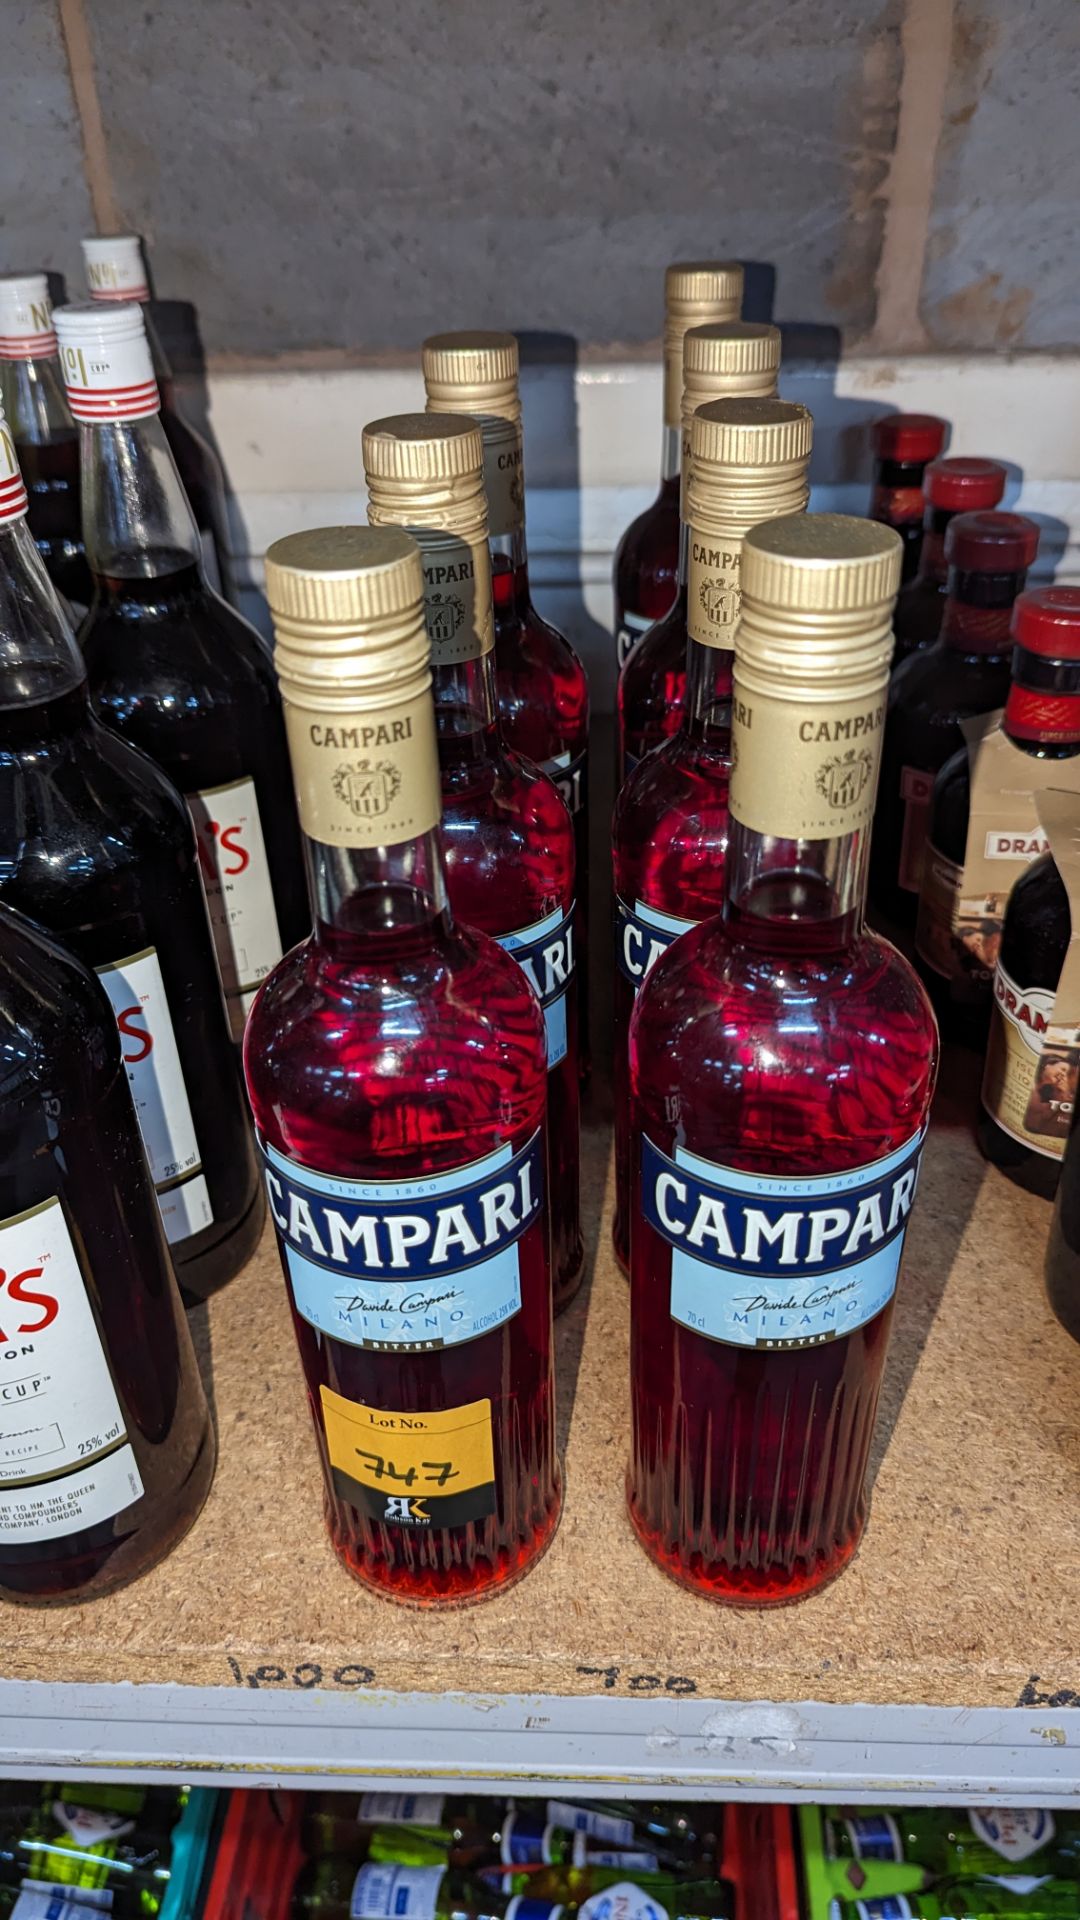 7 bottles of Campari sold under AWRS number XQAW00000101017